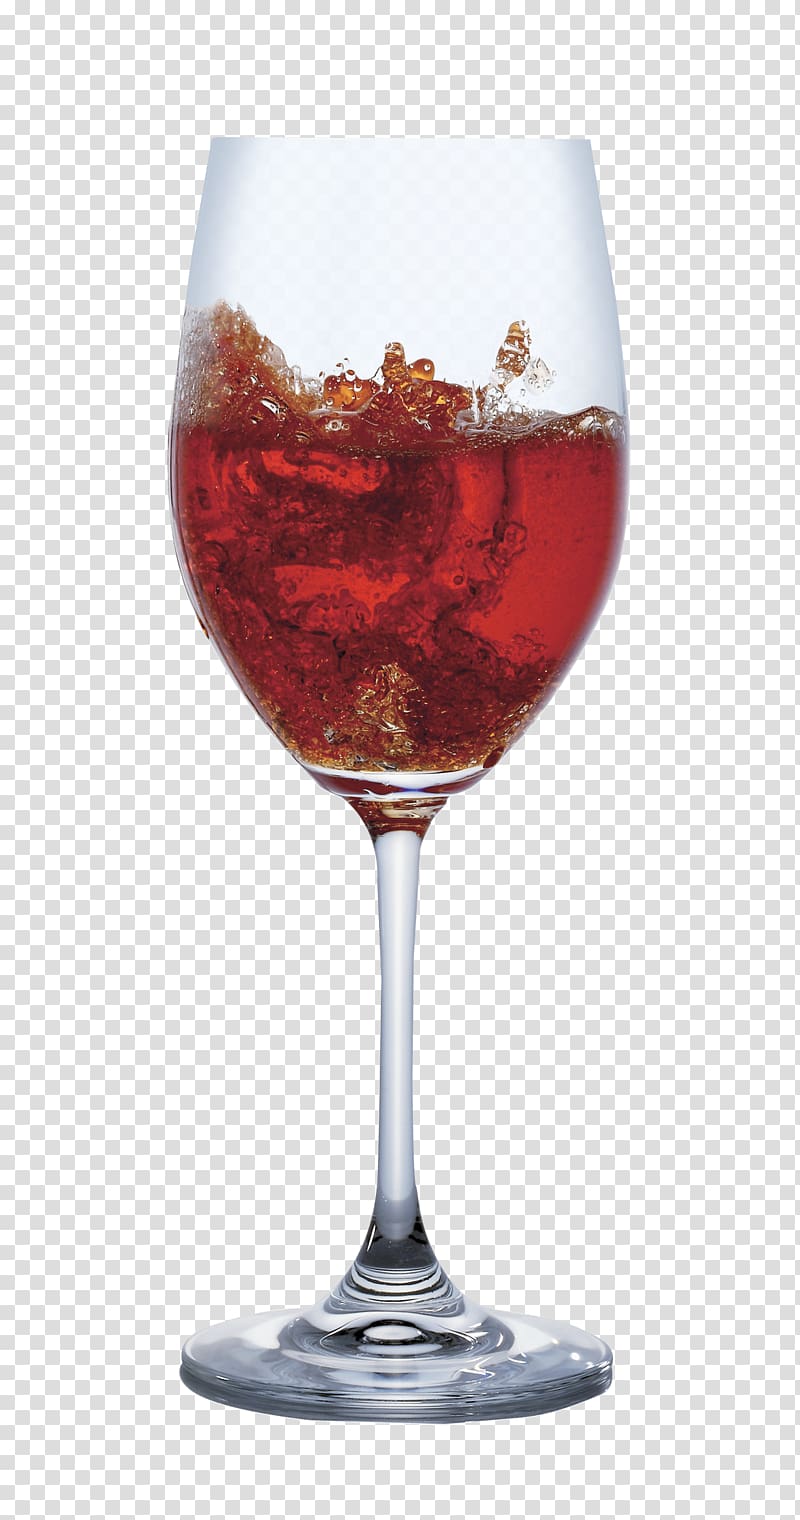 clea wine glass, Wine cocktail Distilled beverage Wine cocktail Martini, Cocktail Glass transparent background PNG clipart